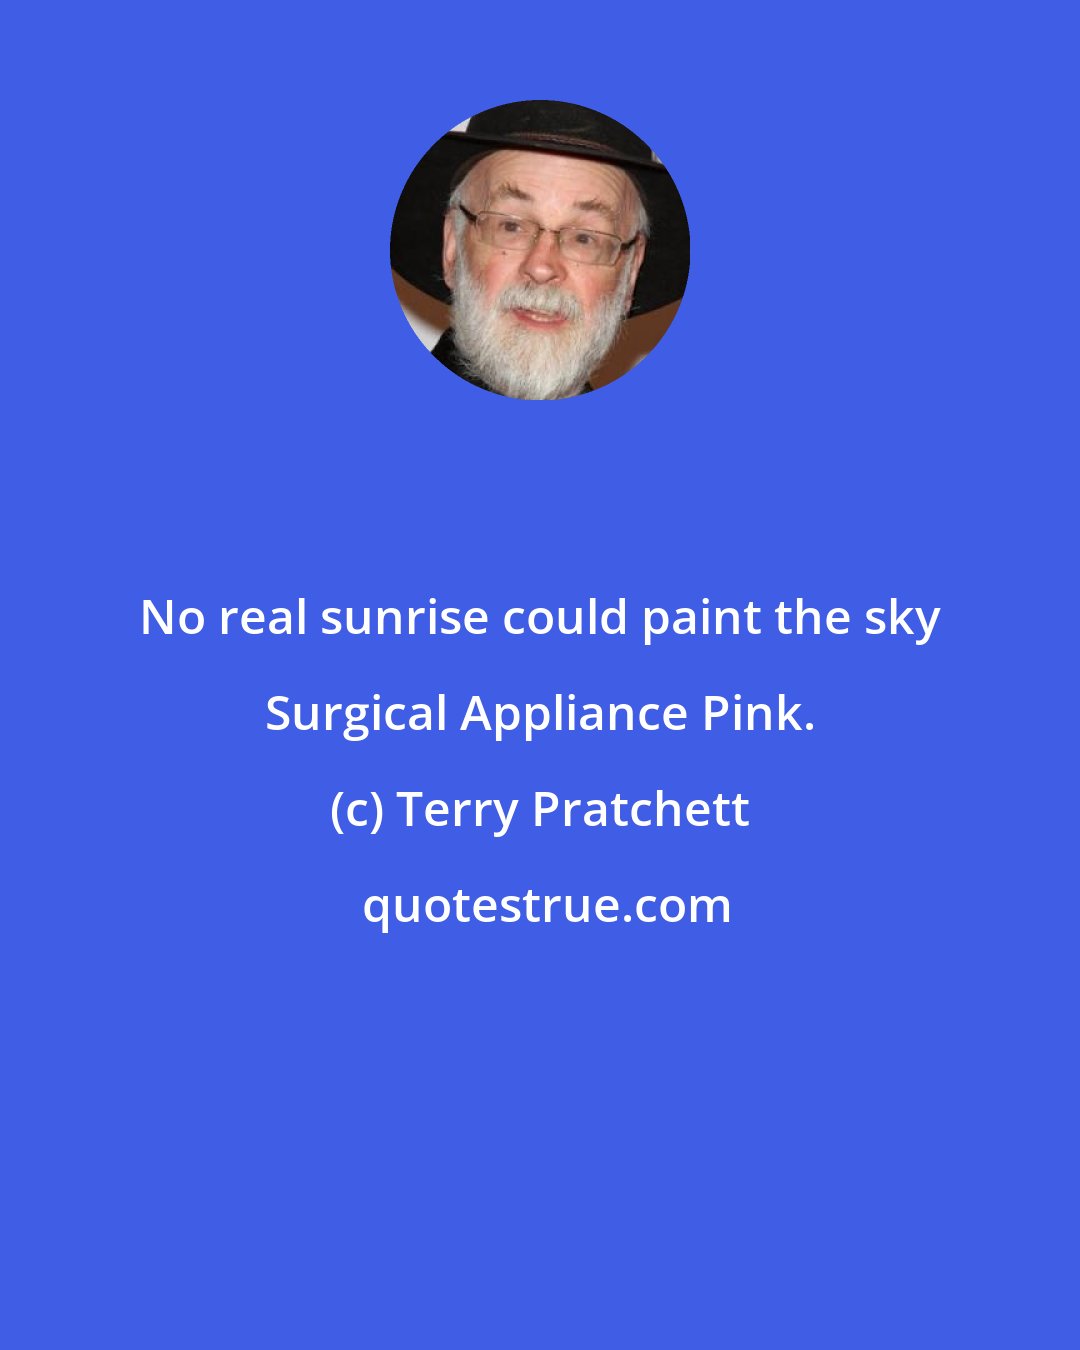 Terry Pratchett: No real sunrise could paint the sky Surgical Appliance Pink.